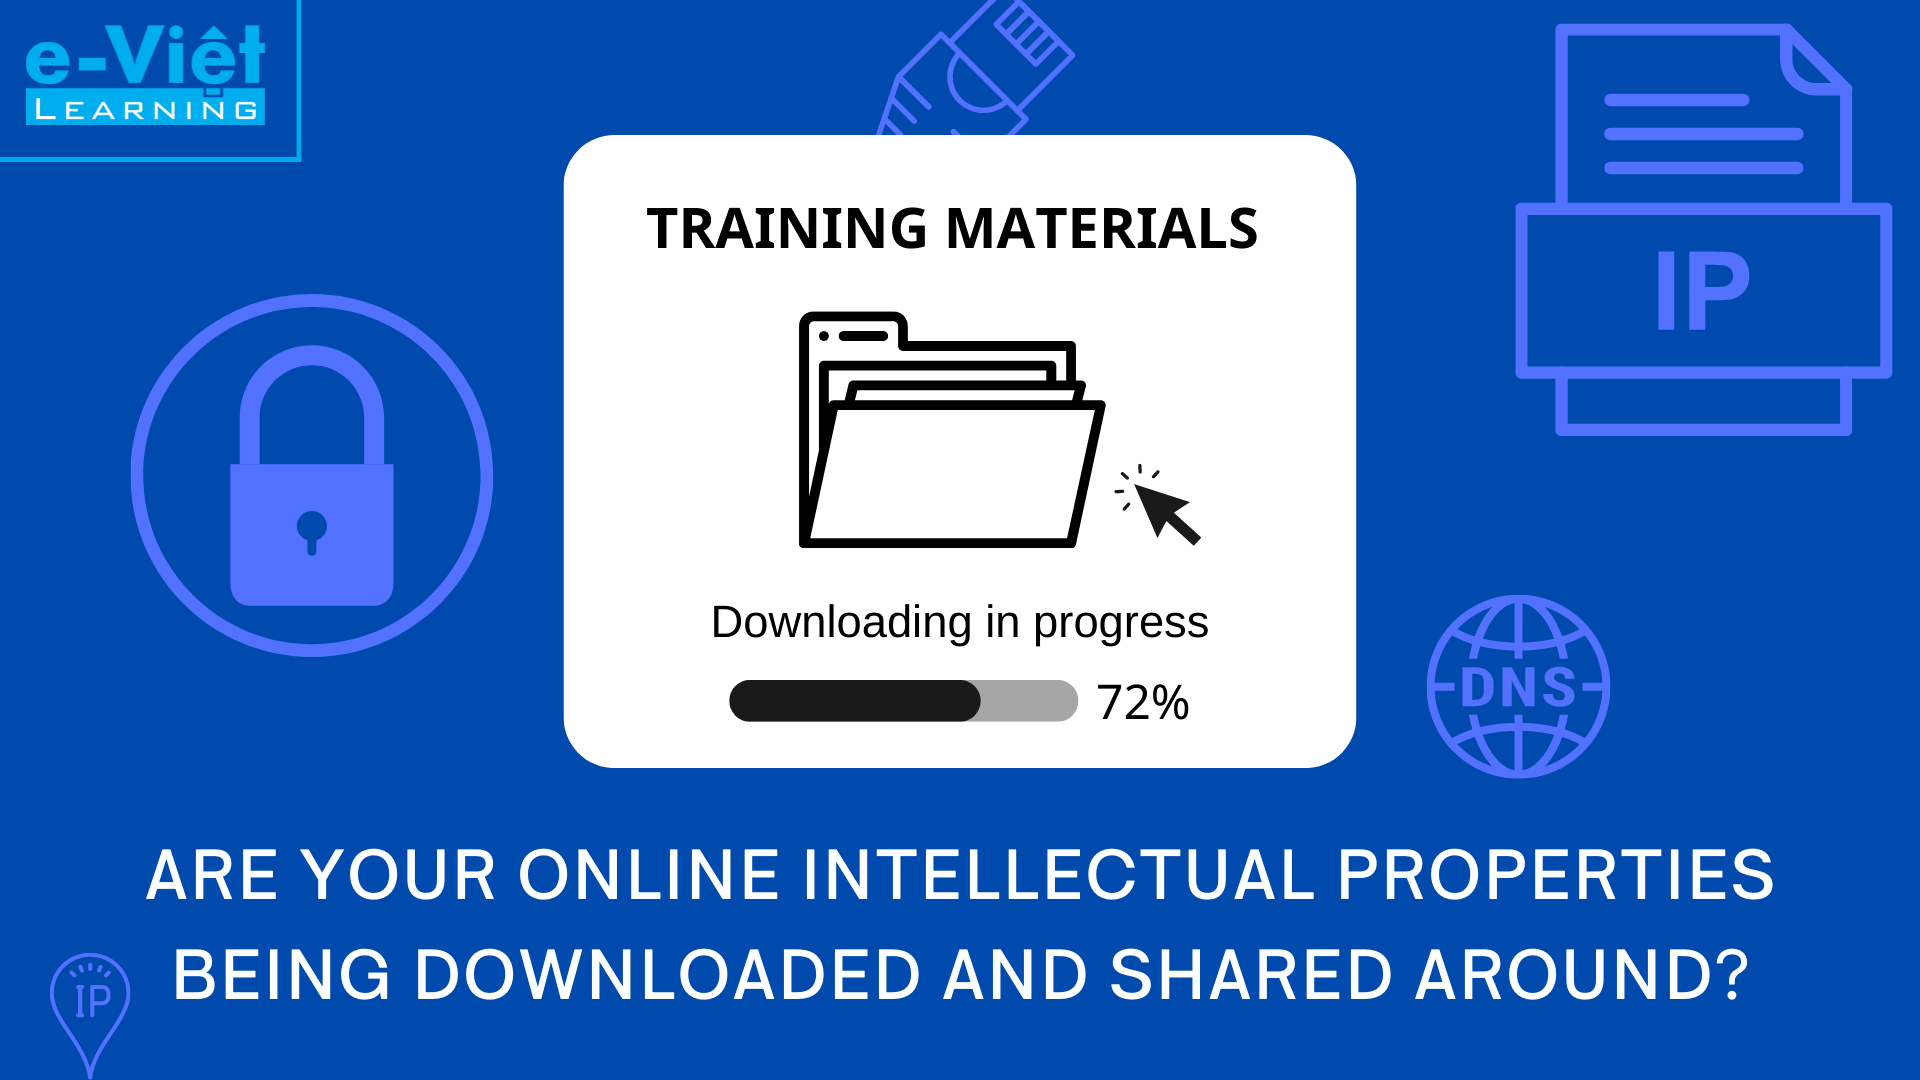 Do you need to protect your Intellectual Properties?